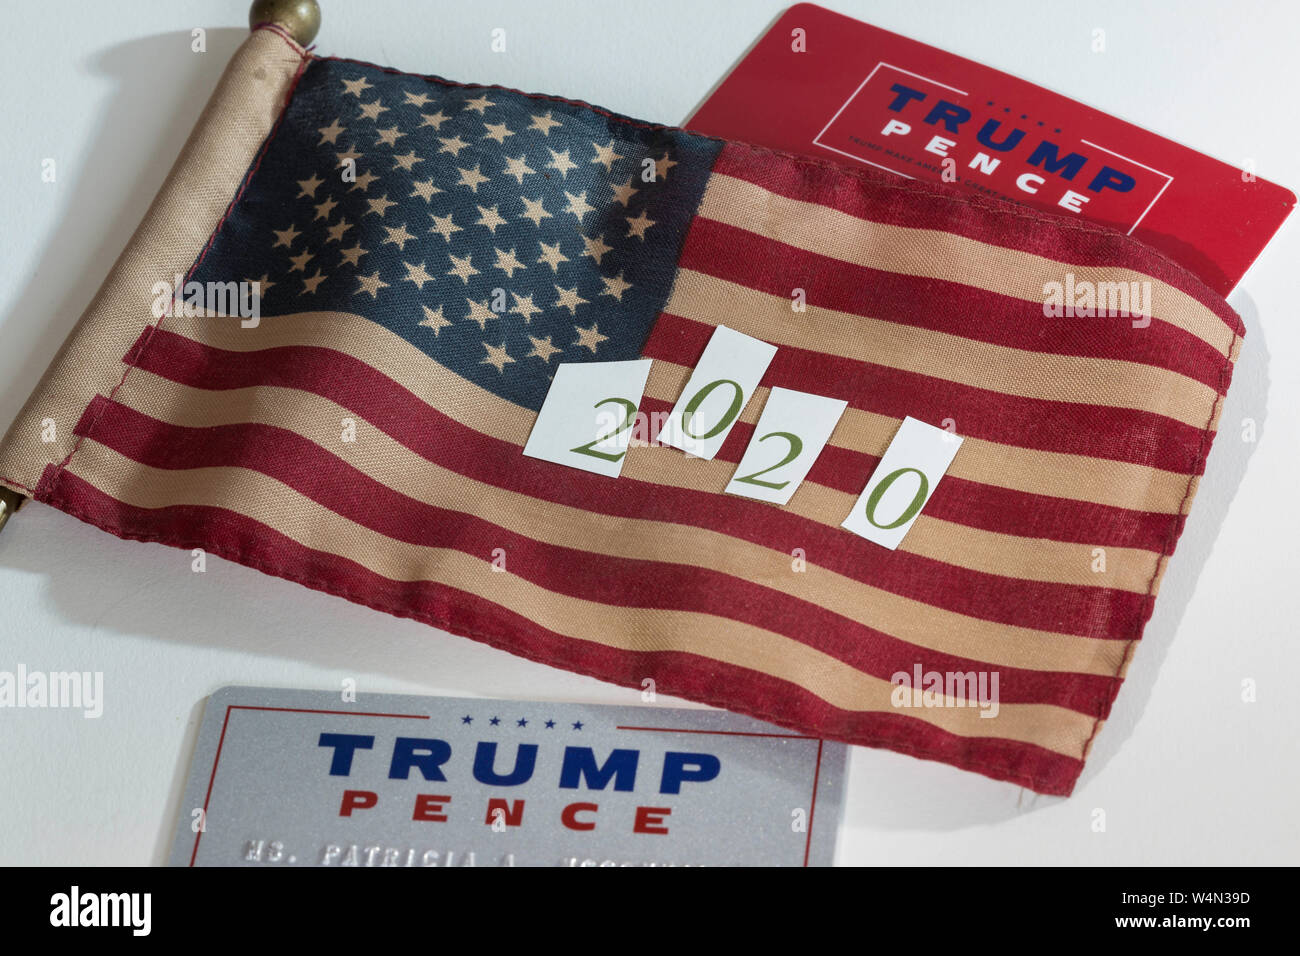 Concept Still Life for 2020 Elections, United States Stock Photo